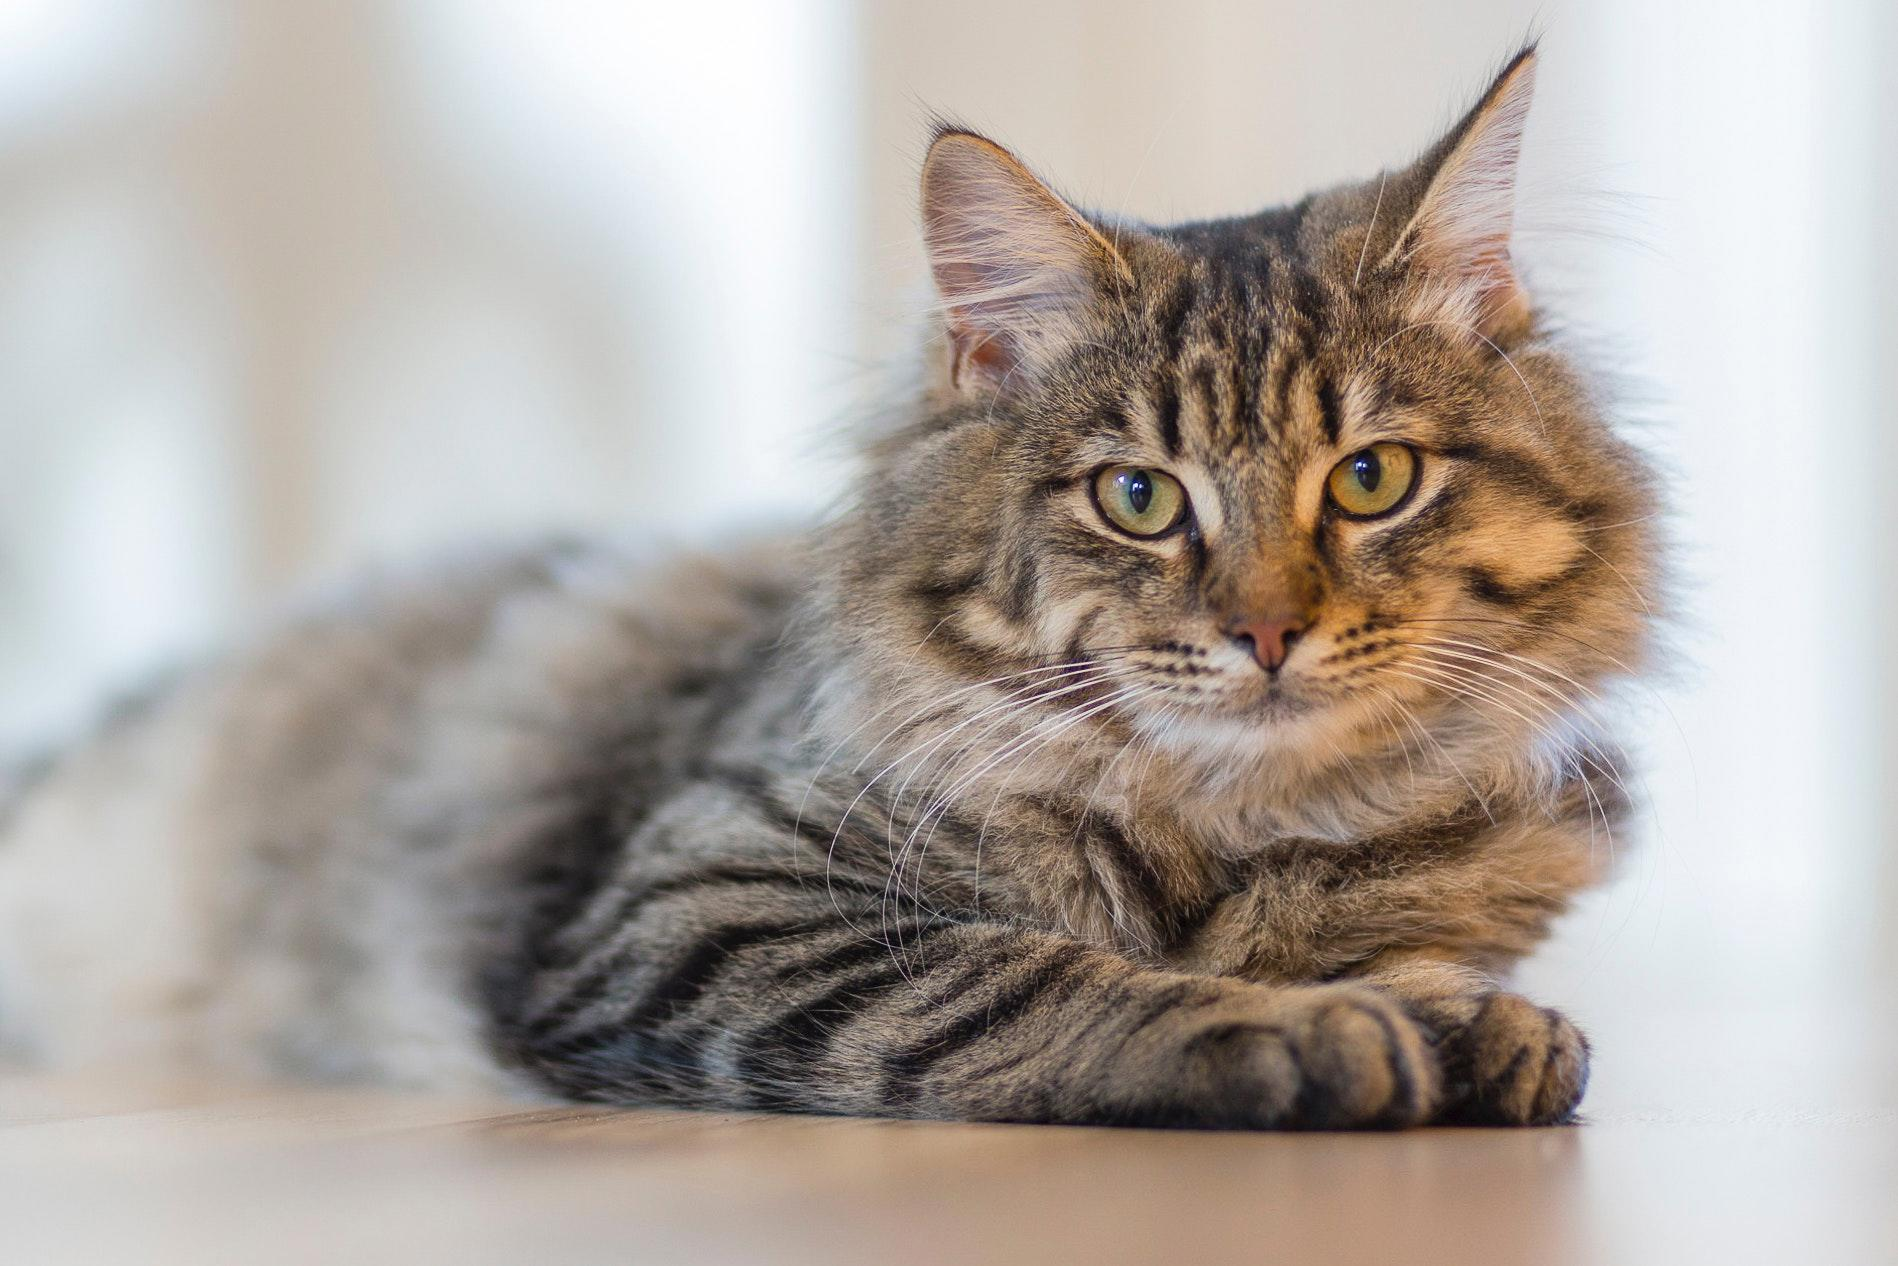 Common Allergies in Cats: What to Look Out For